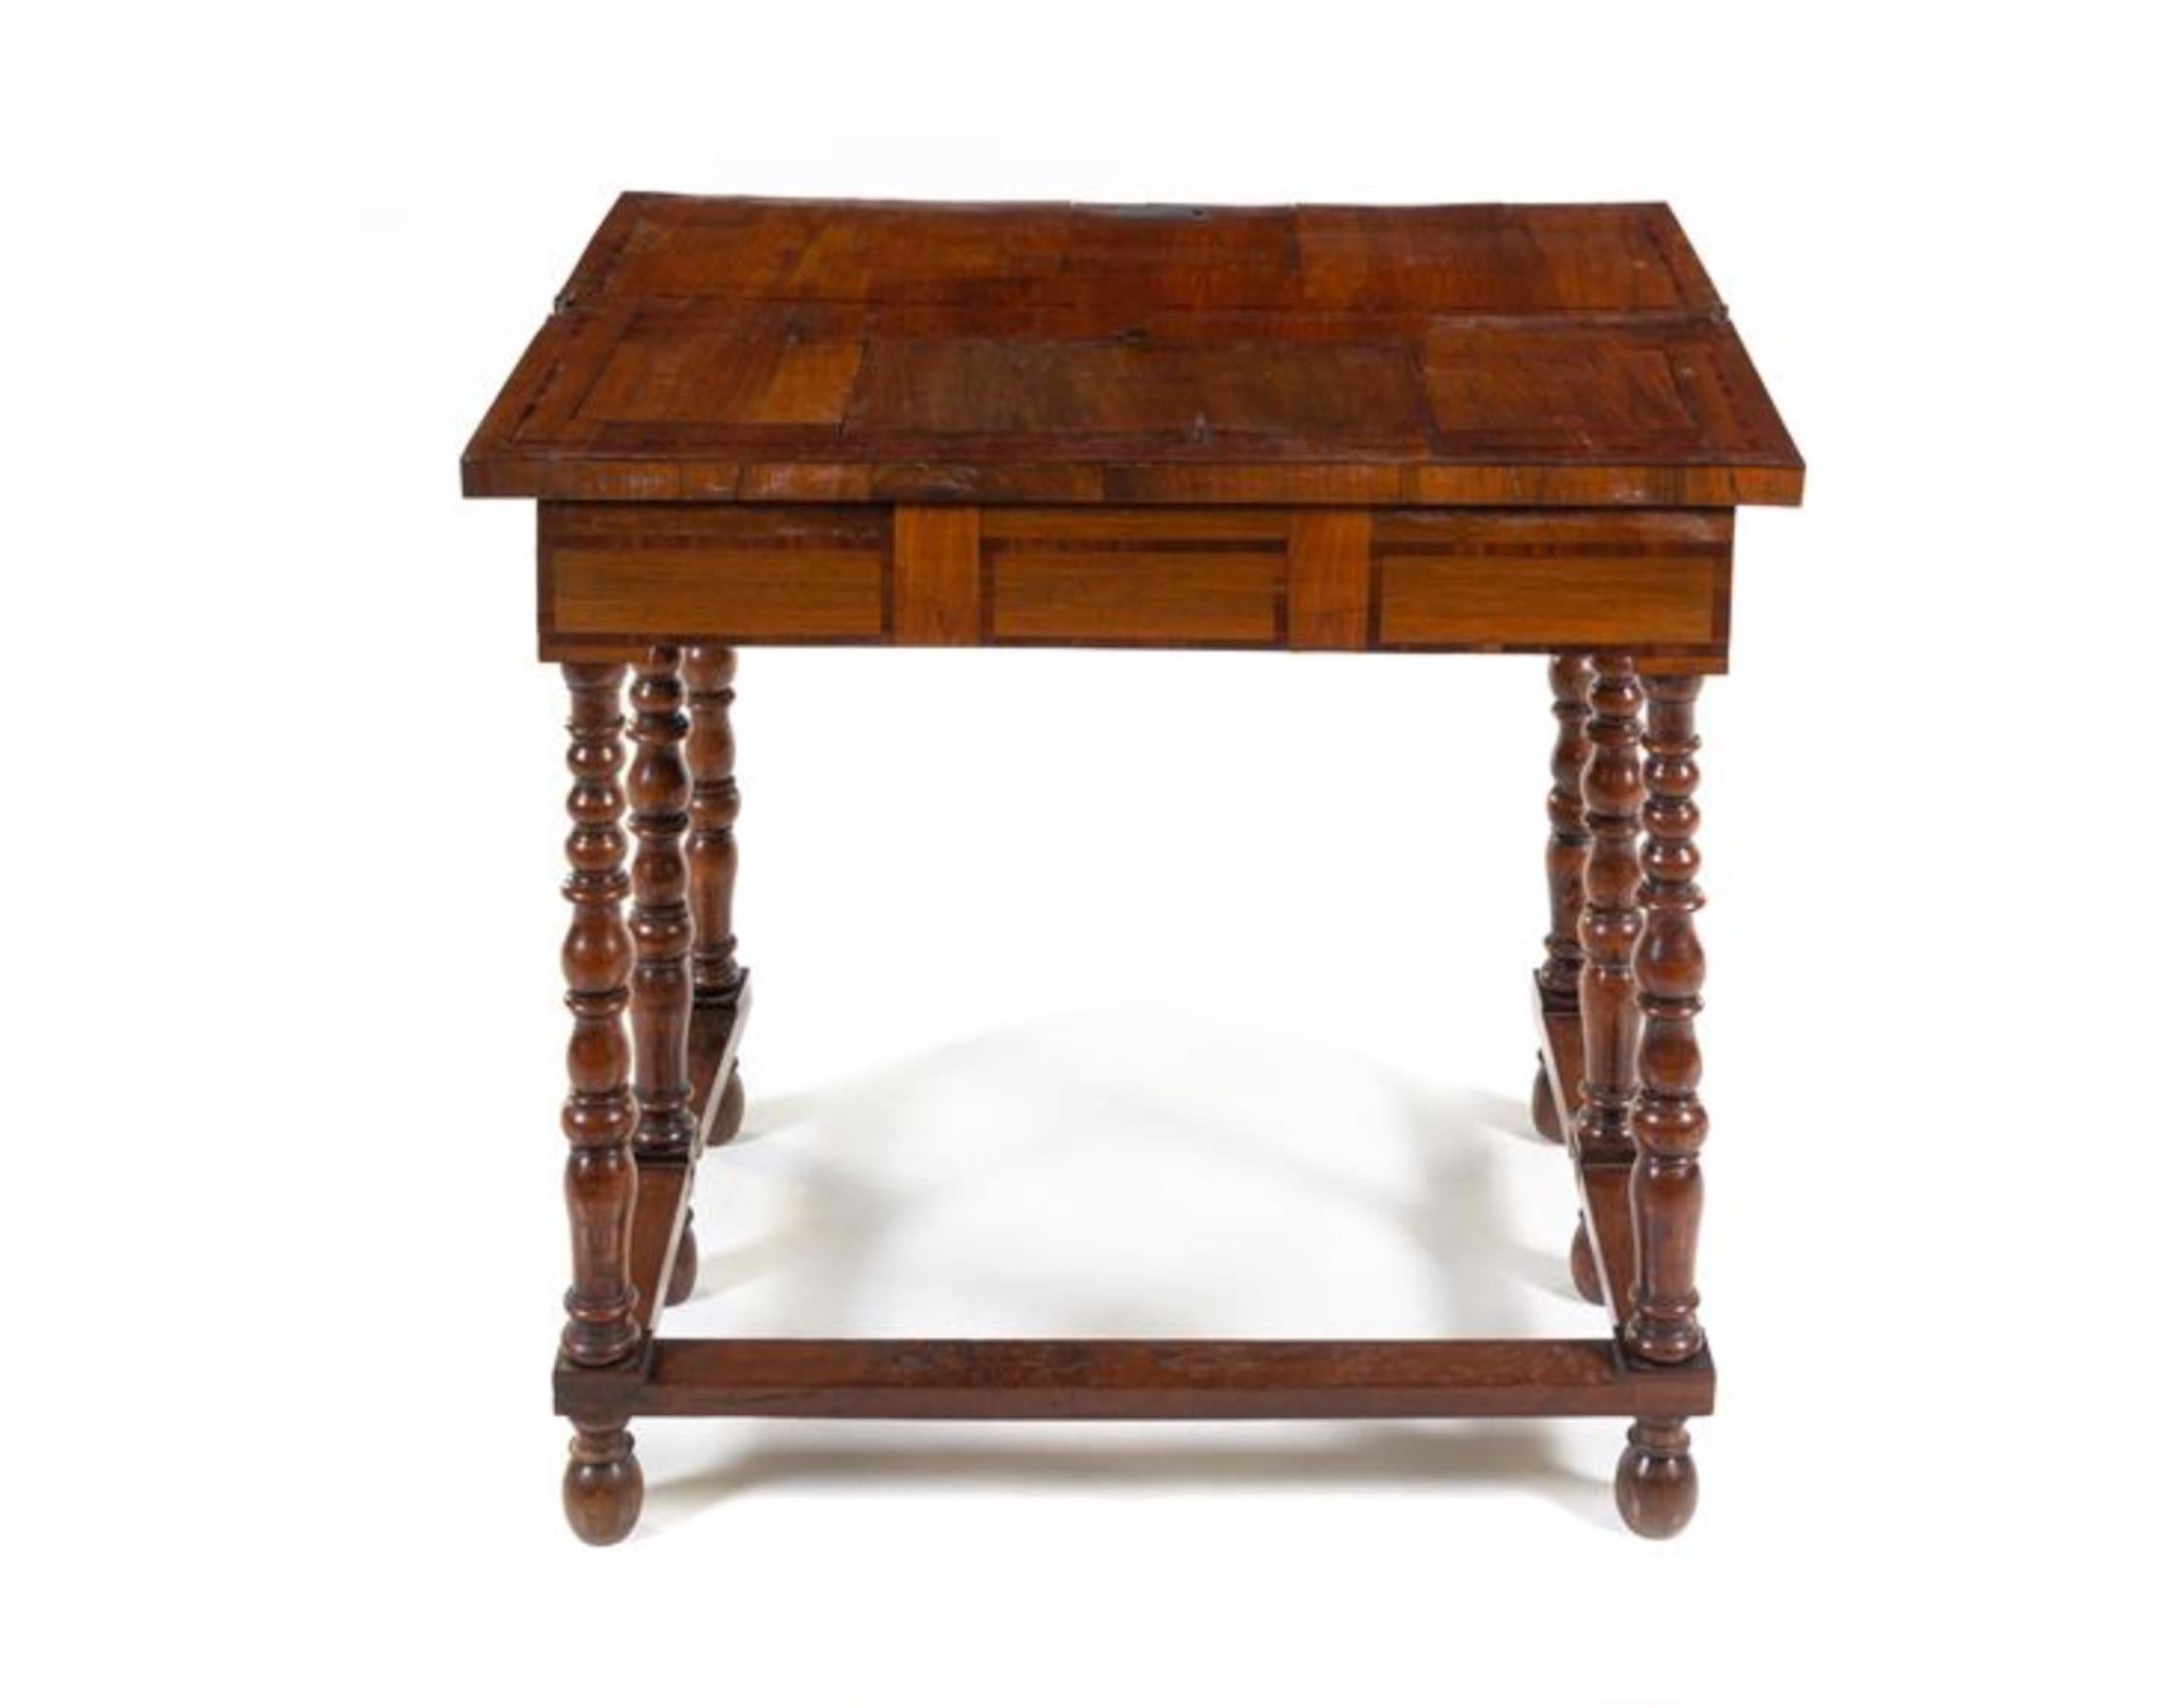 18th century flip top gate leg card table or console. Period top with later bottom. Great color and Patination. Can be used as a side table or small console.